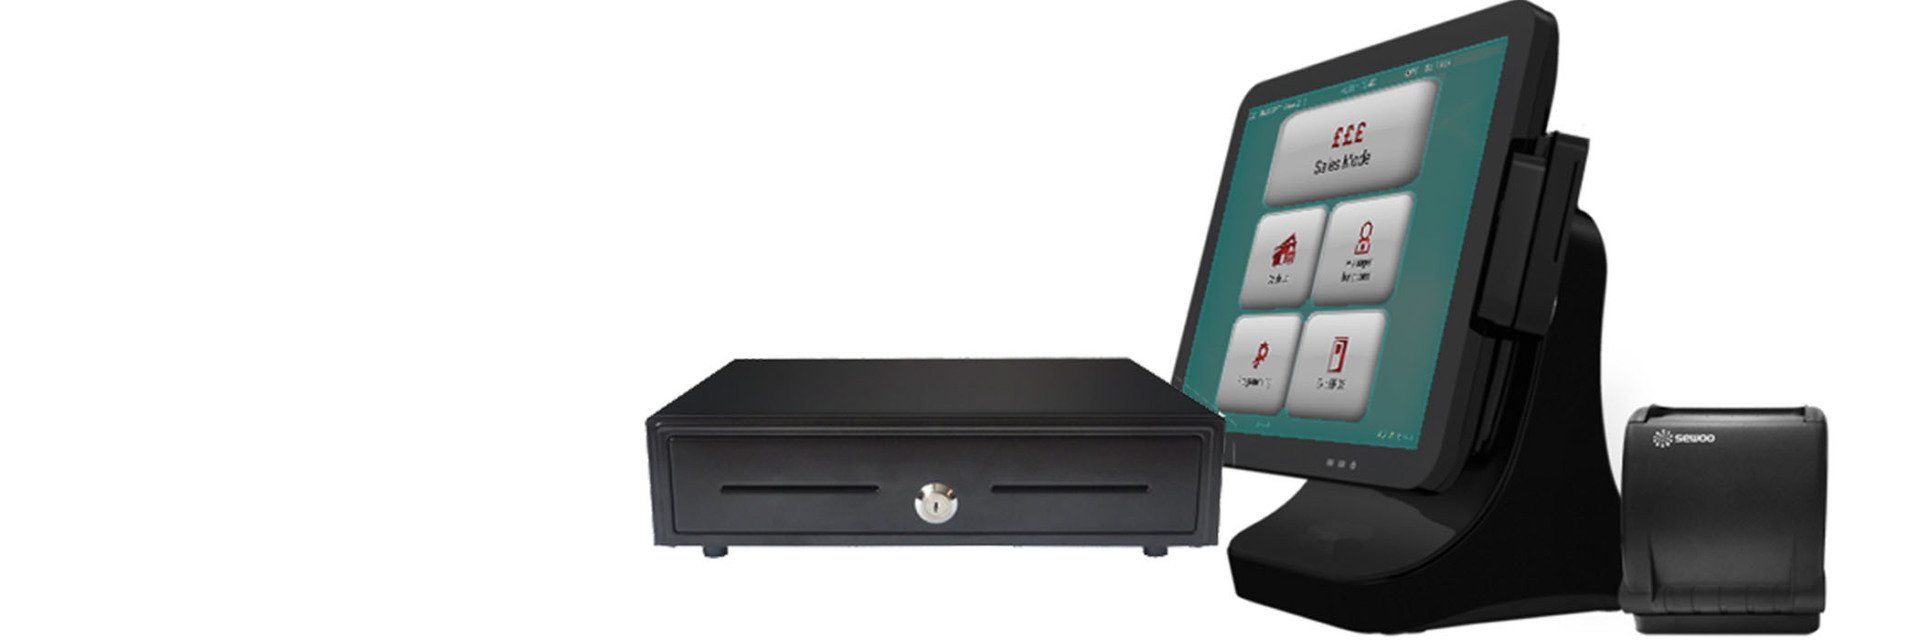 Complete EPOS systems in the Midlands installed from £999